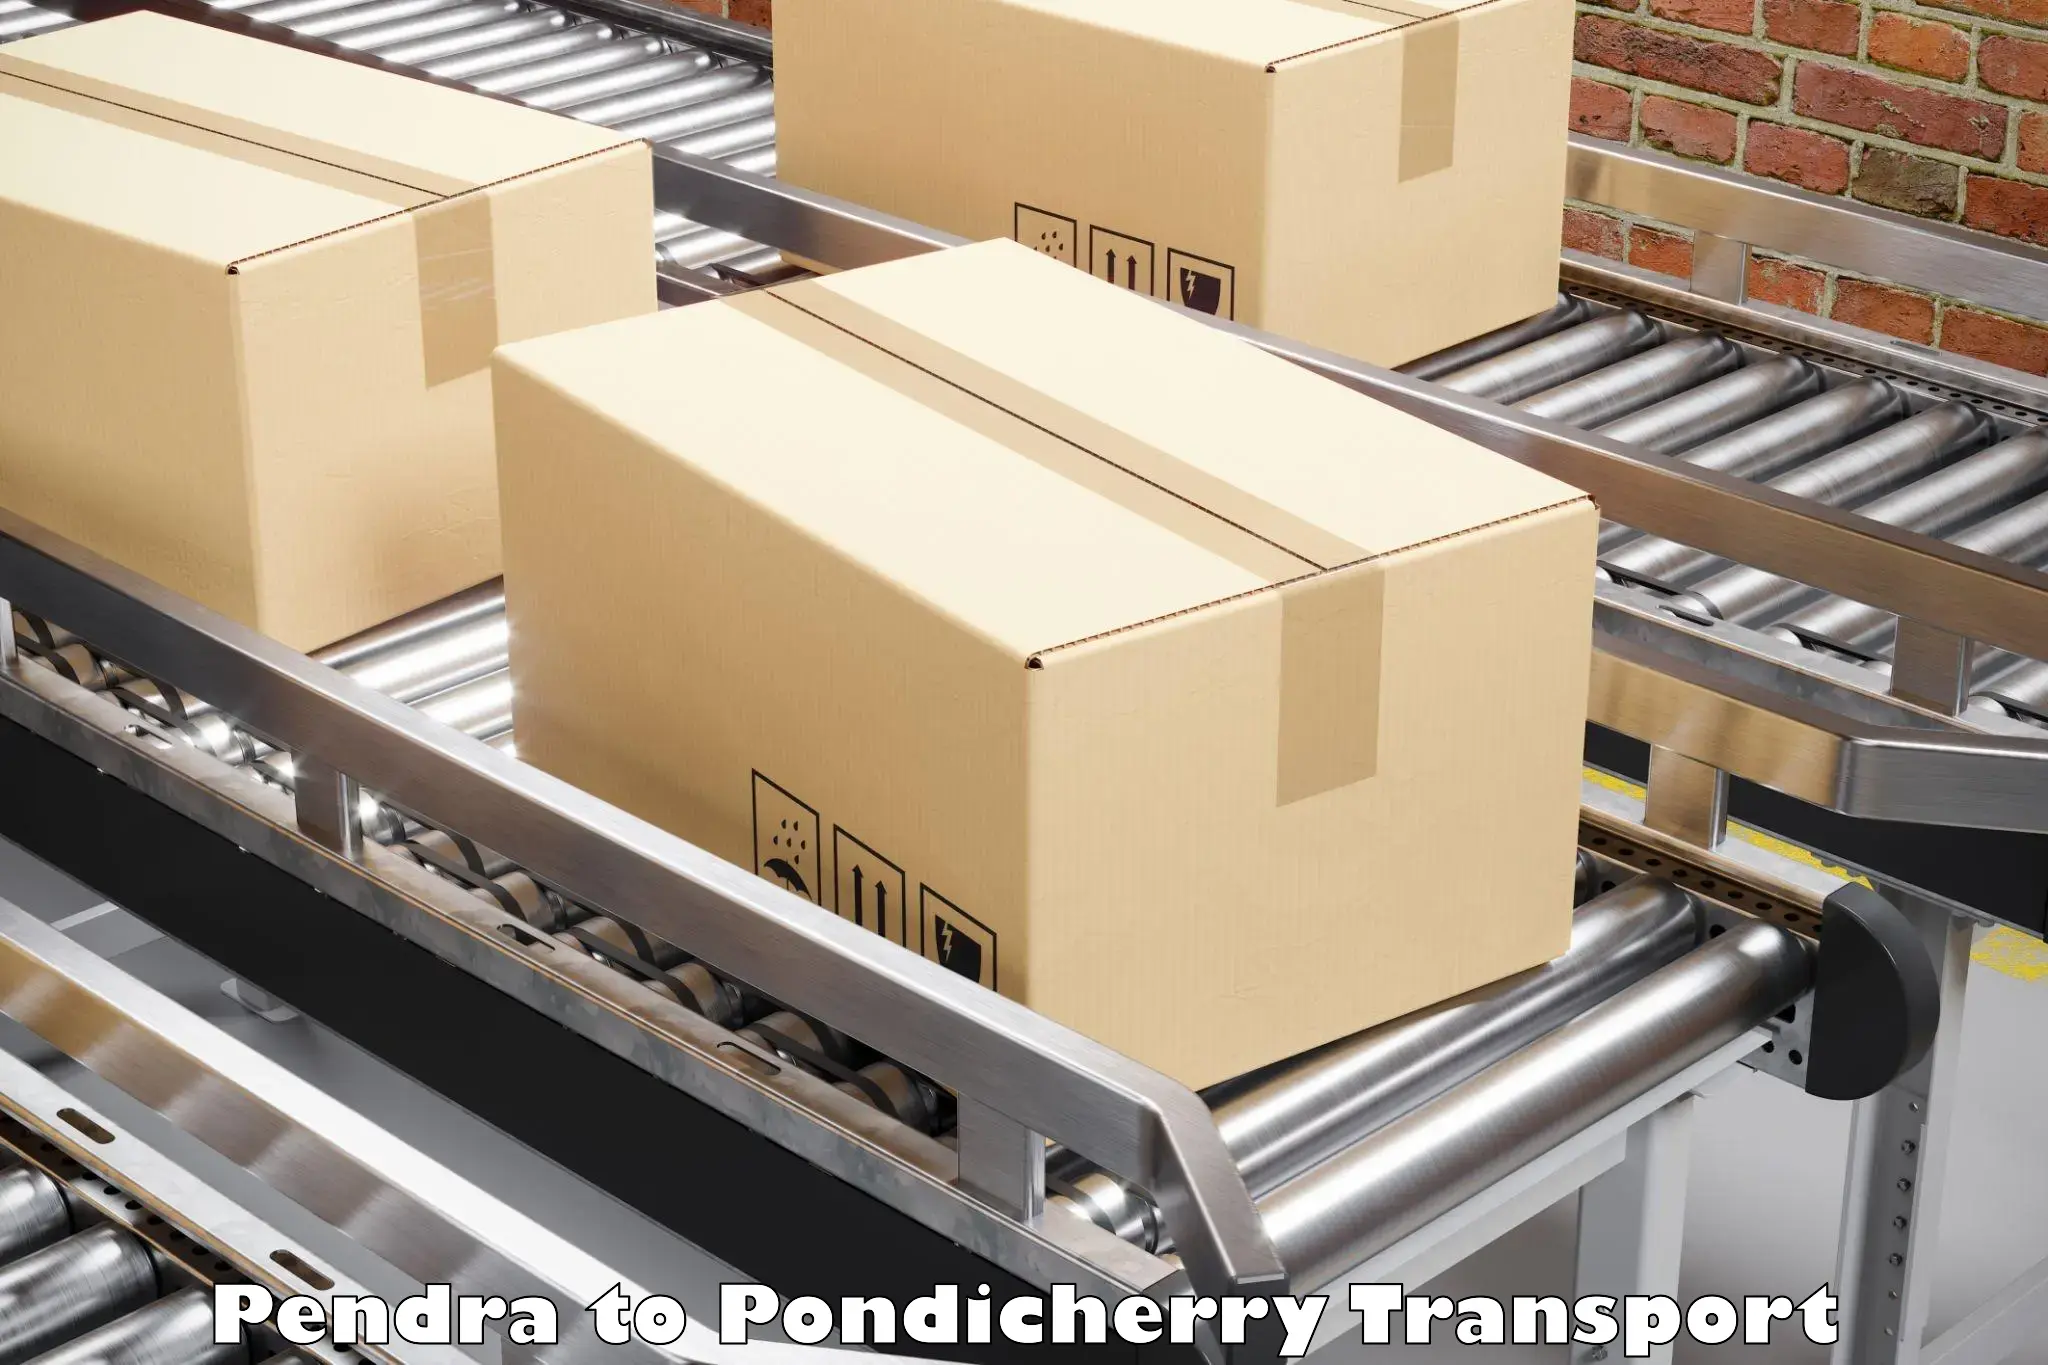 Road transport online services Pendra to Pondicherry